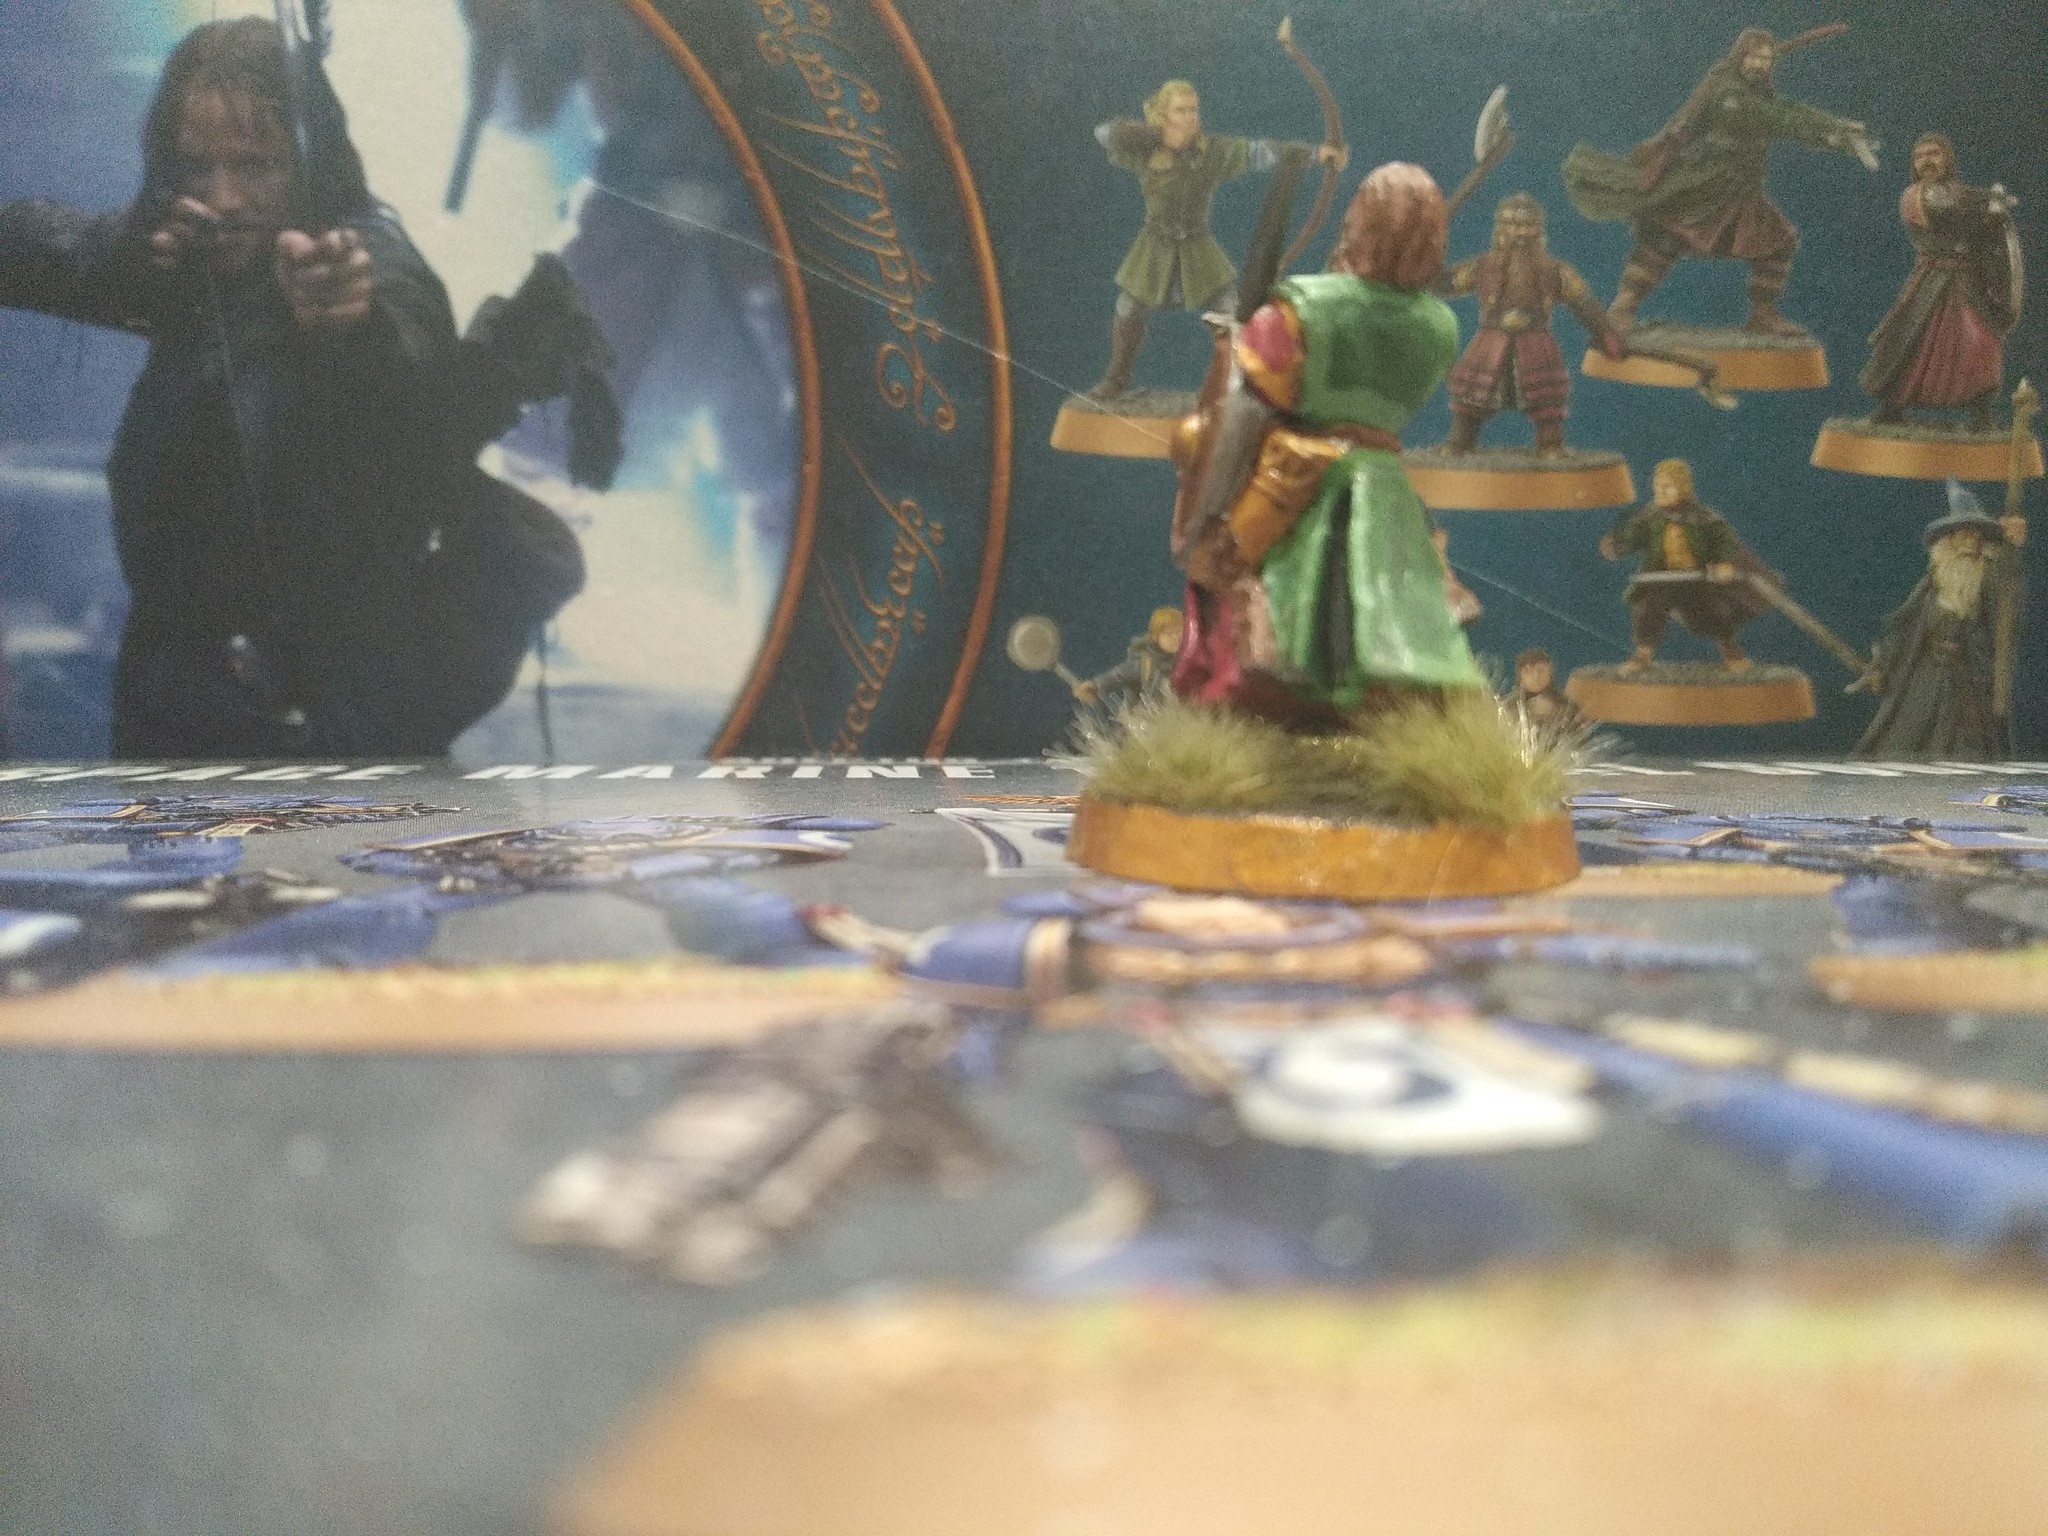 Painting Boromir from Lord of the Rings - My, Boromir, Lord of the Rings, Figurines, Painting miniatures, Desktop wargame, Games Workshop